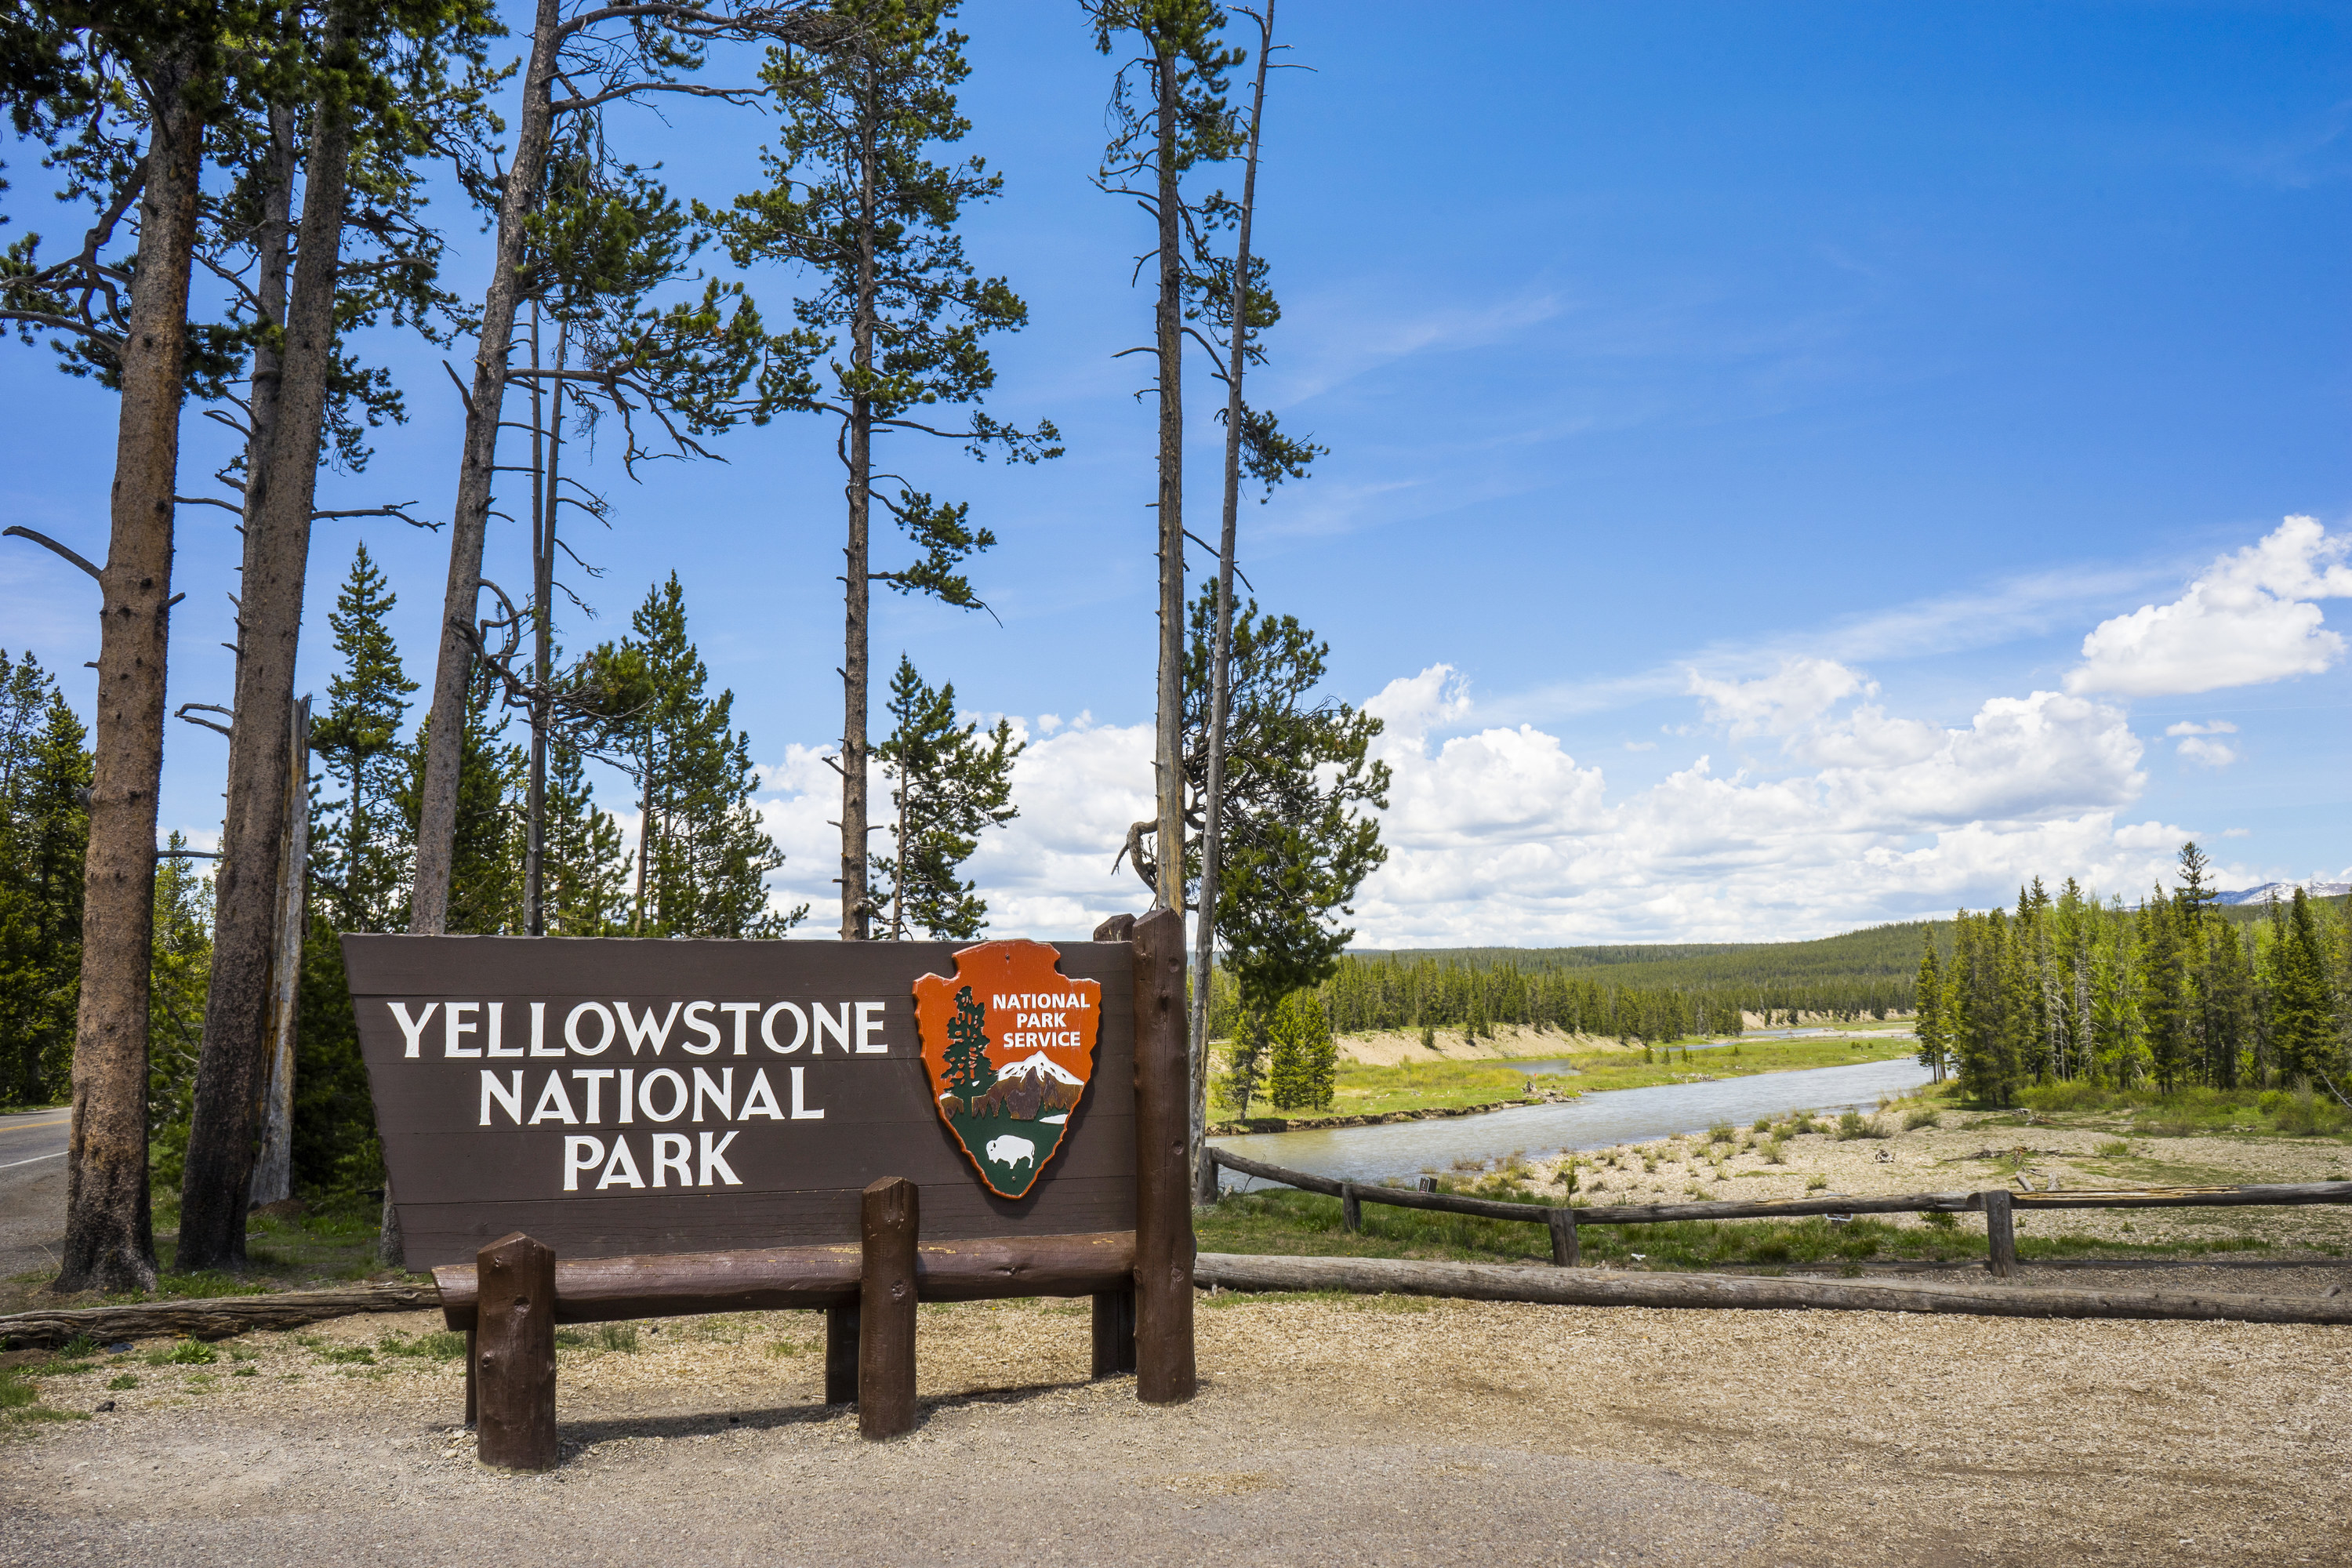 The entrance to Yellowstone National Park